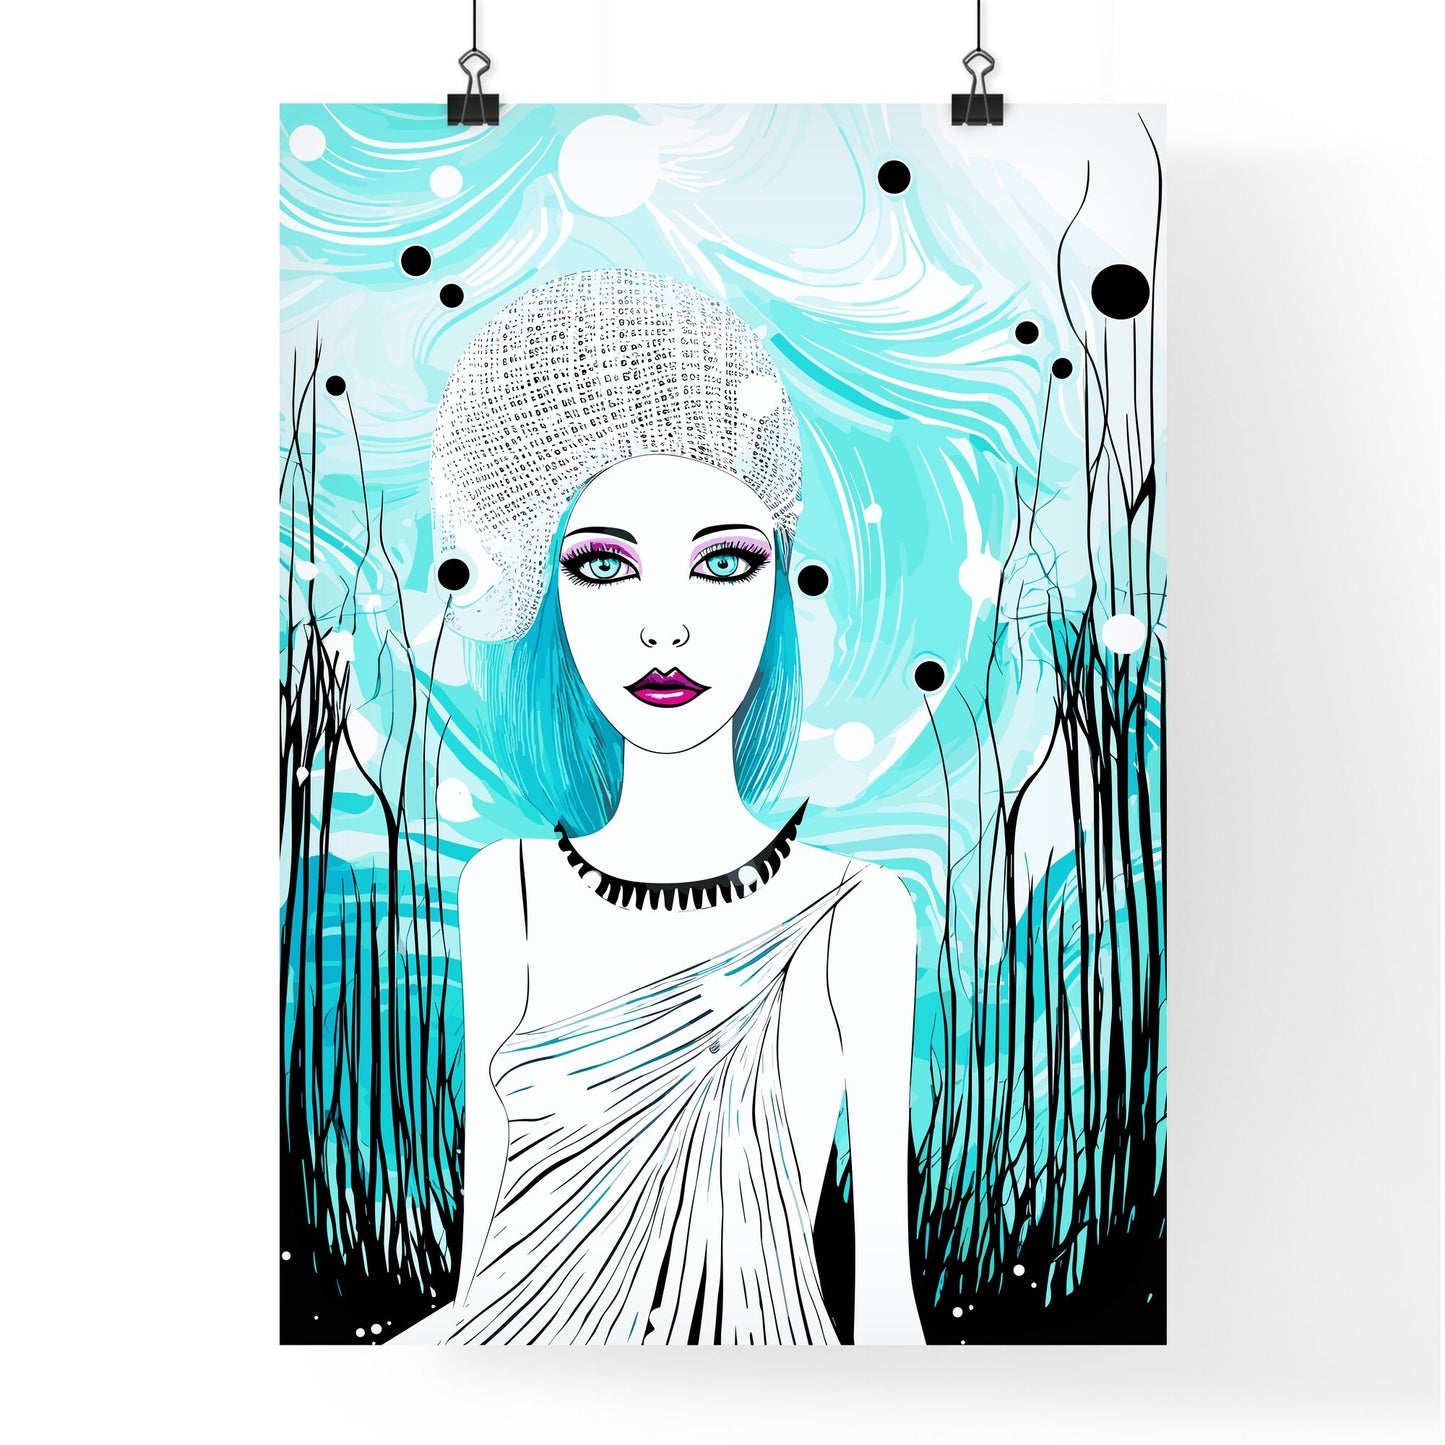 Lifestyle Fashion Illustration In The Disco Club - A Woman With Blue Hair And A White Hat Default Title